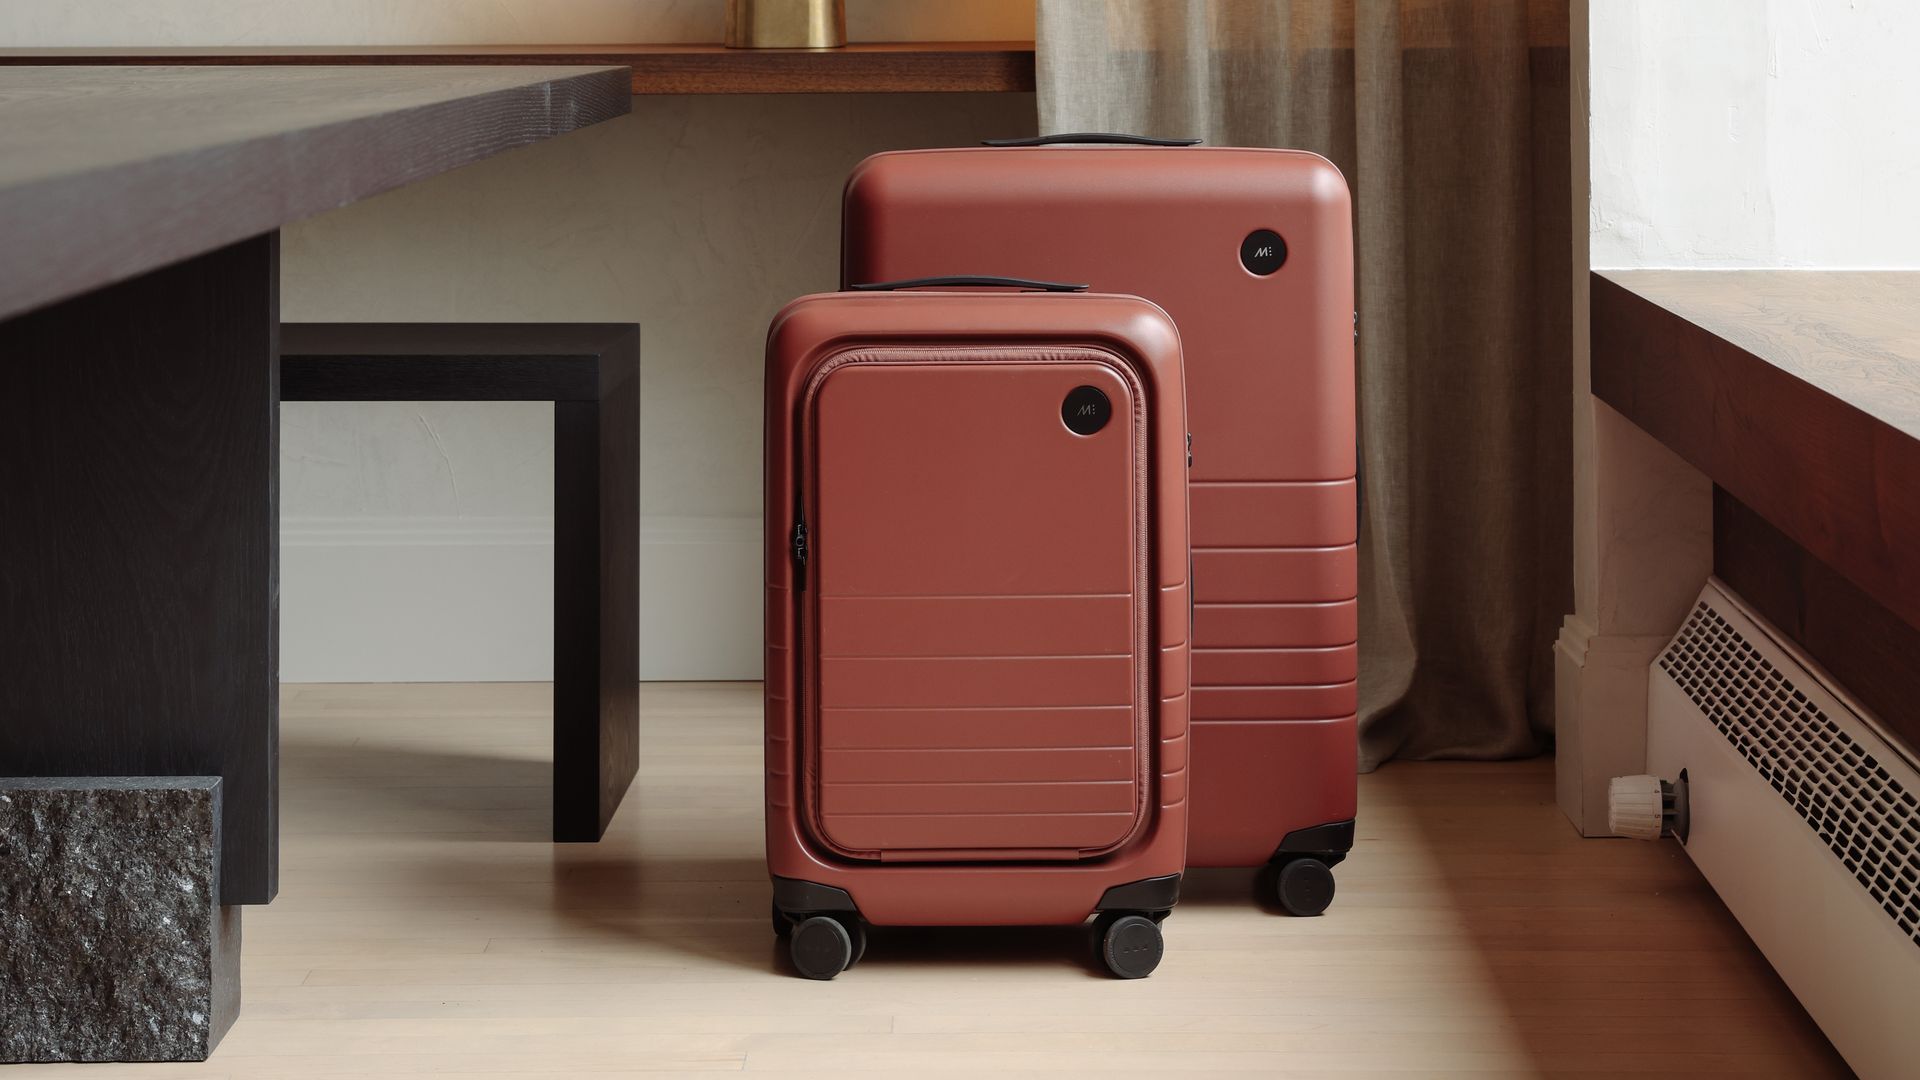 Two pieces of luggage, both a dark tan color, sit between a window and a table.